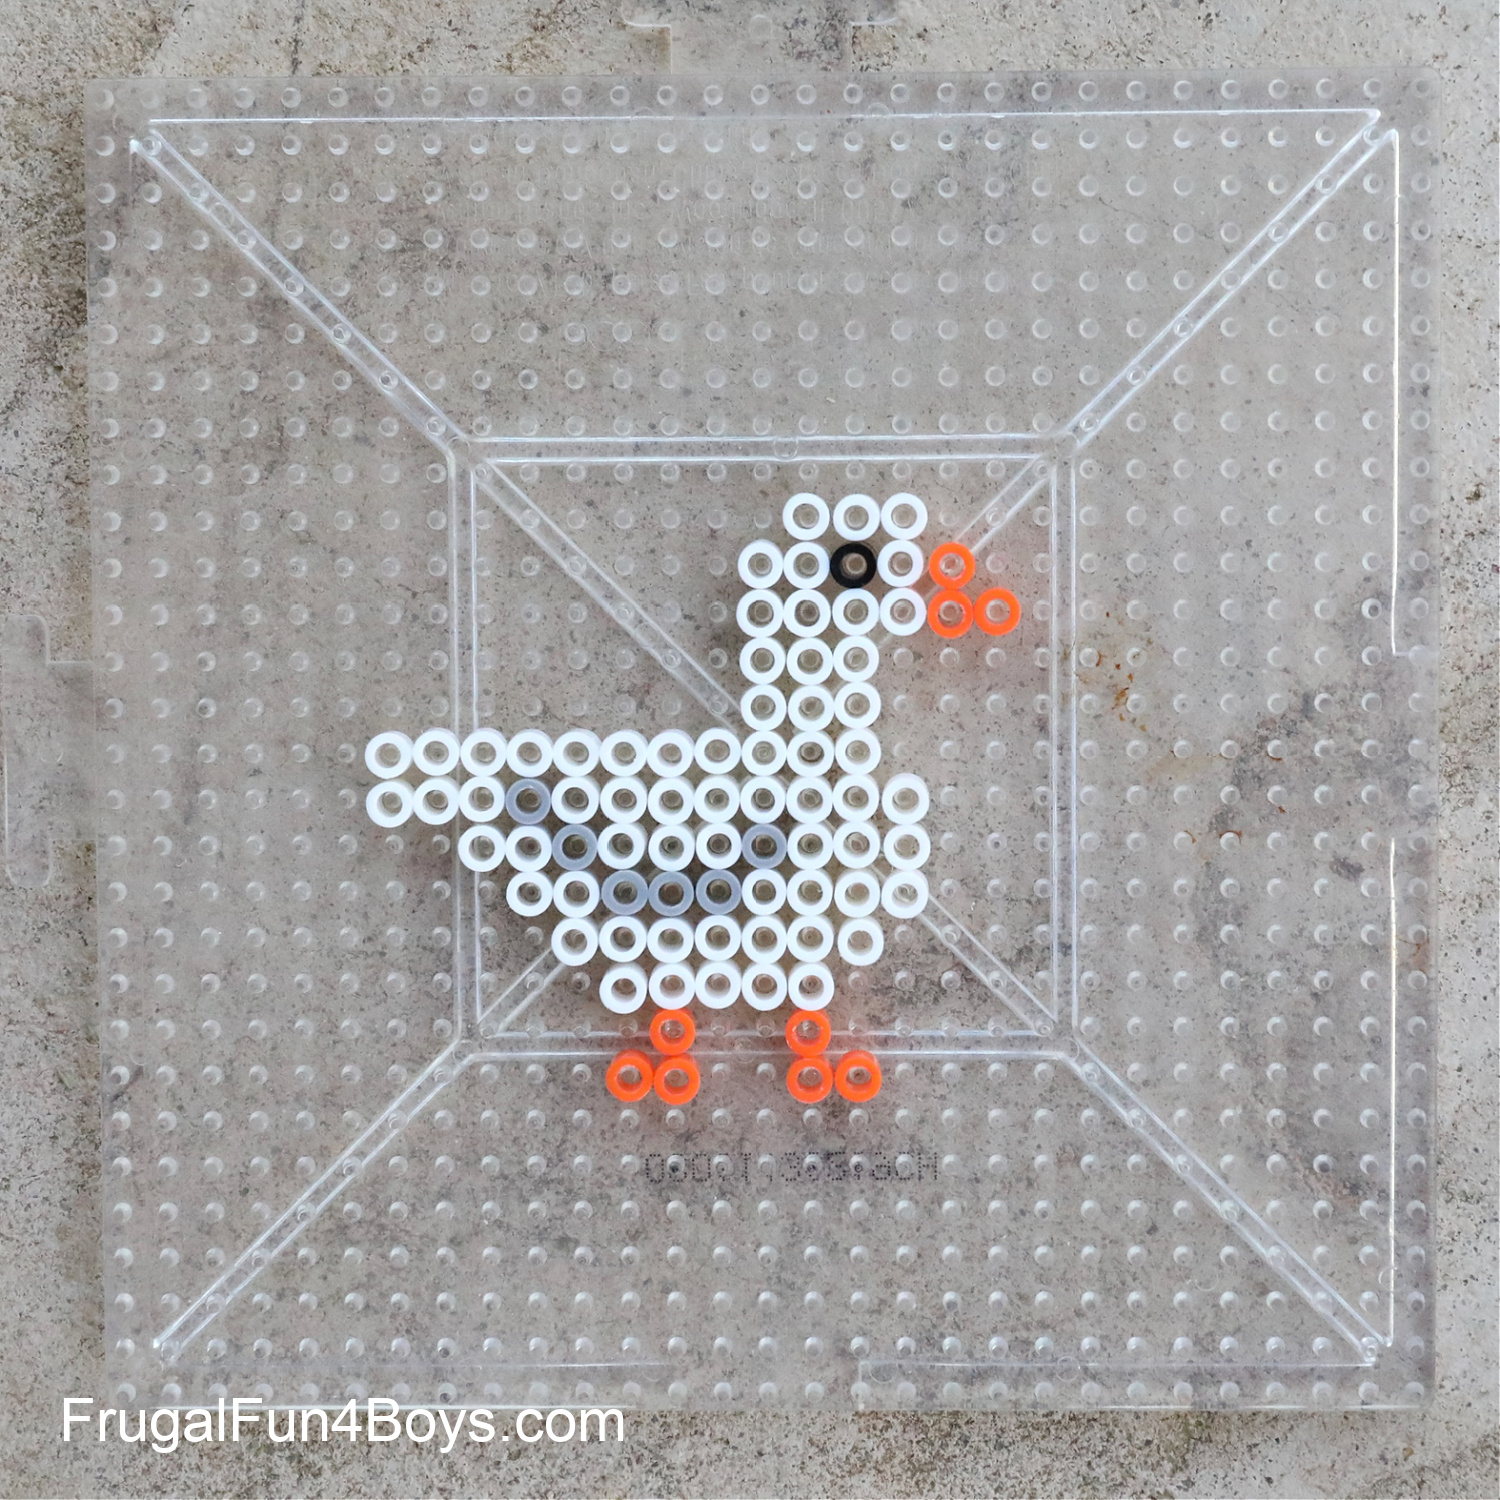 Printable Easter Perler Bead Patterns - Frugal Fun For Boys and Girls